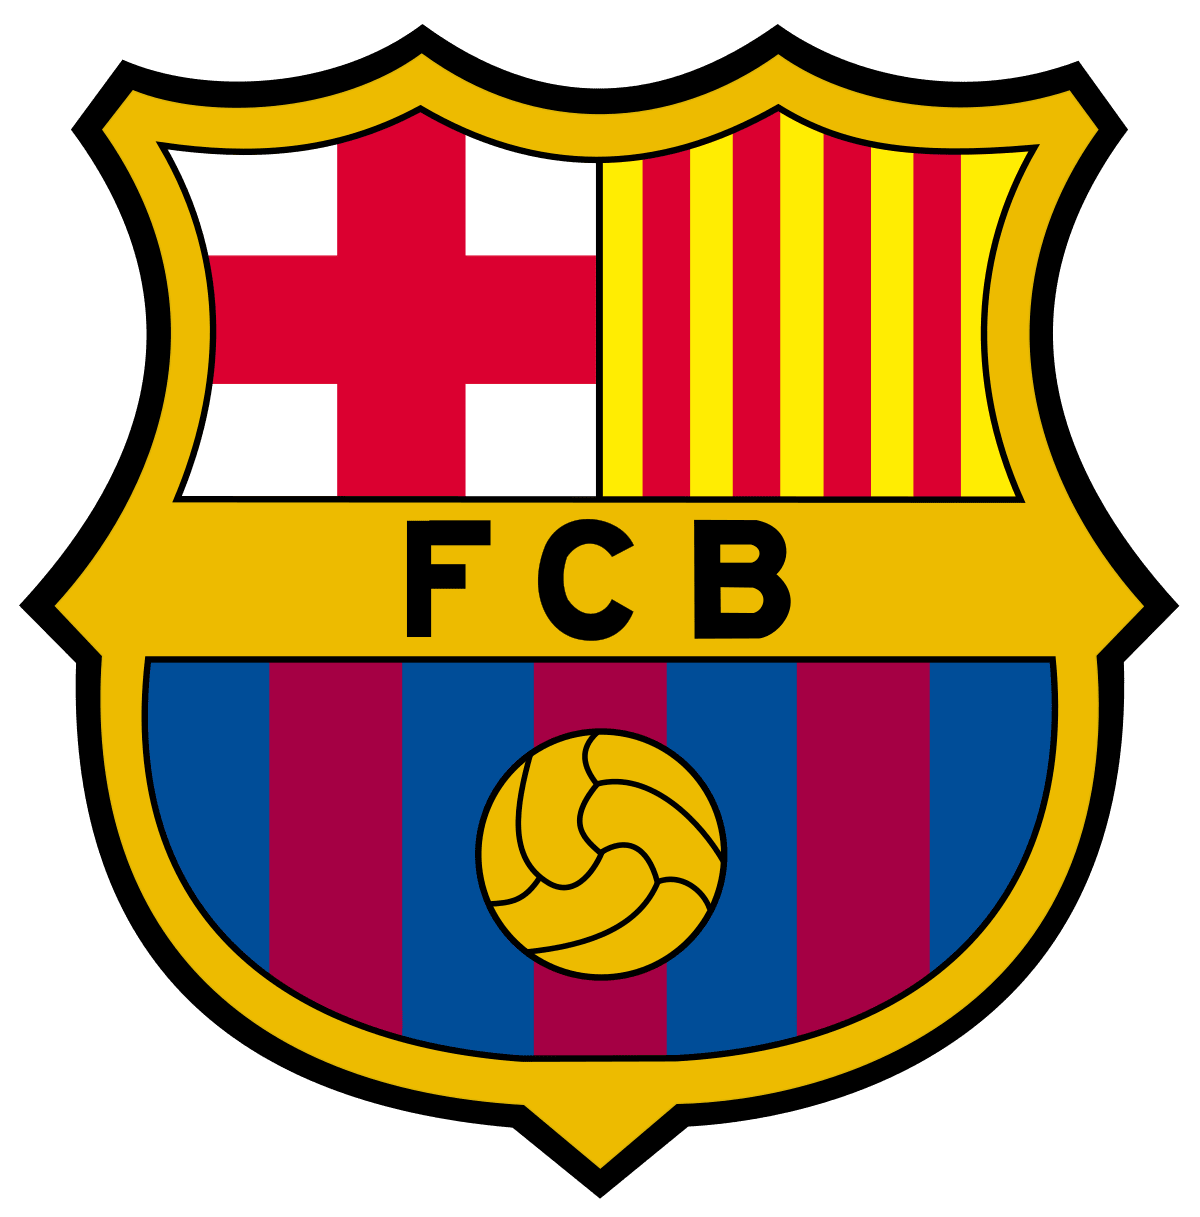 FC Barcelona are one of the most successful European football clubs of all time